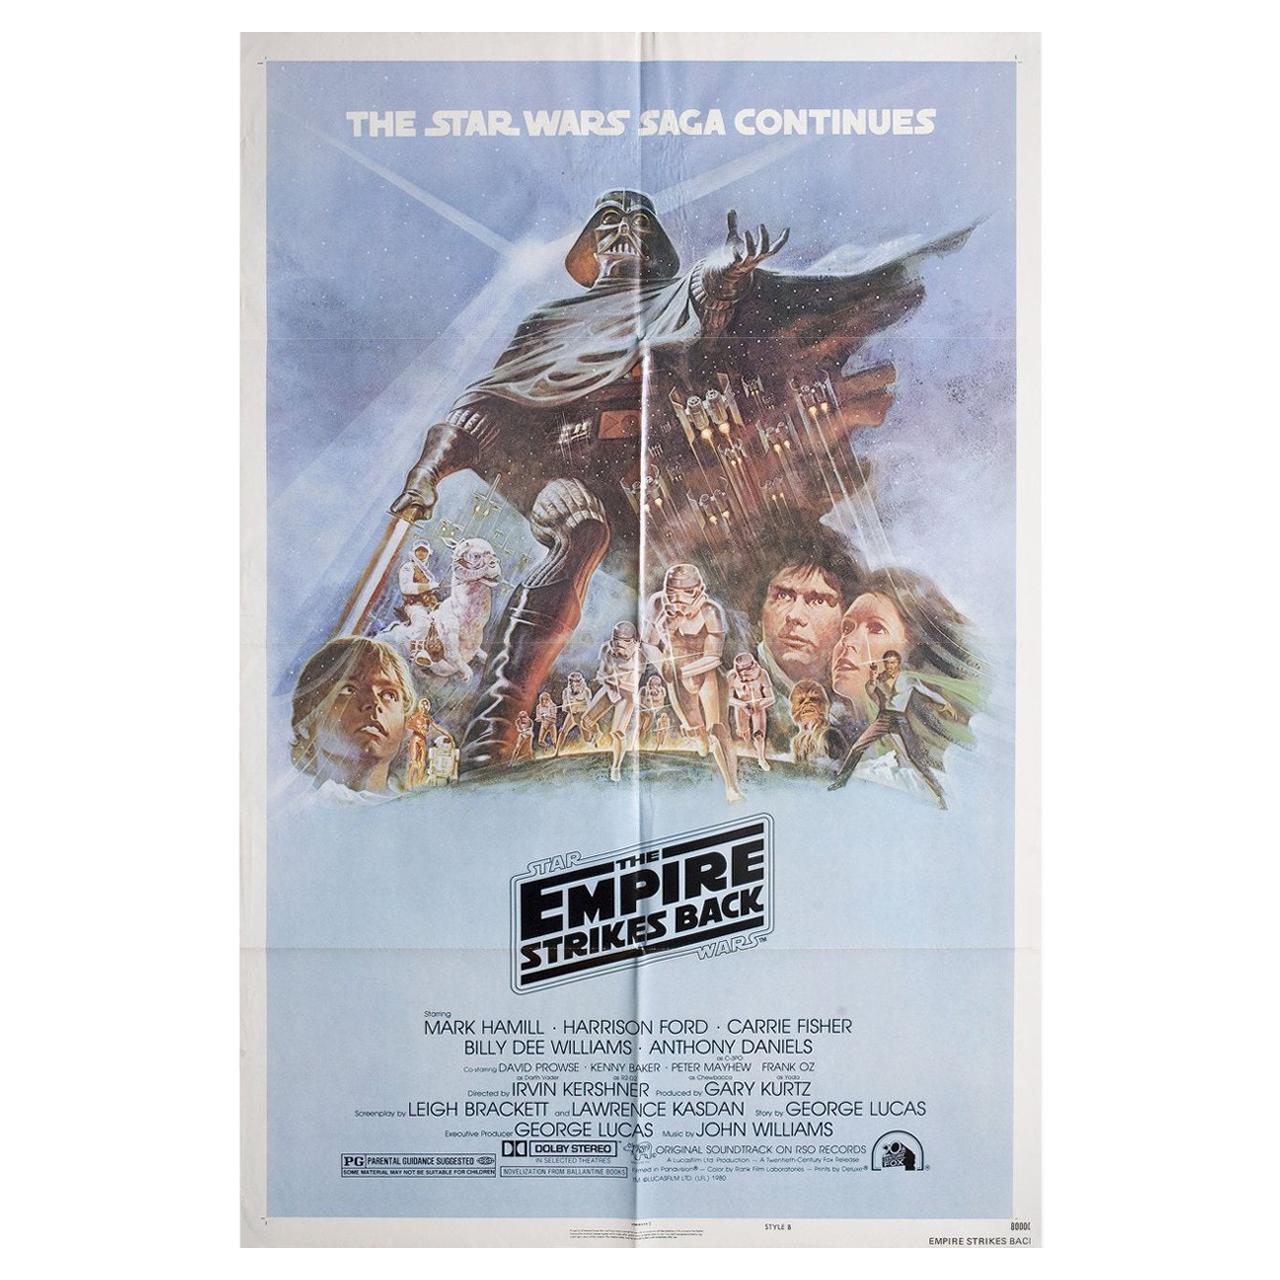 "The Empire Strikes Back" 1980 U.S. One Sheet Film Poster